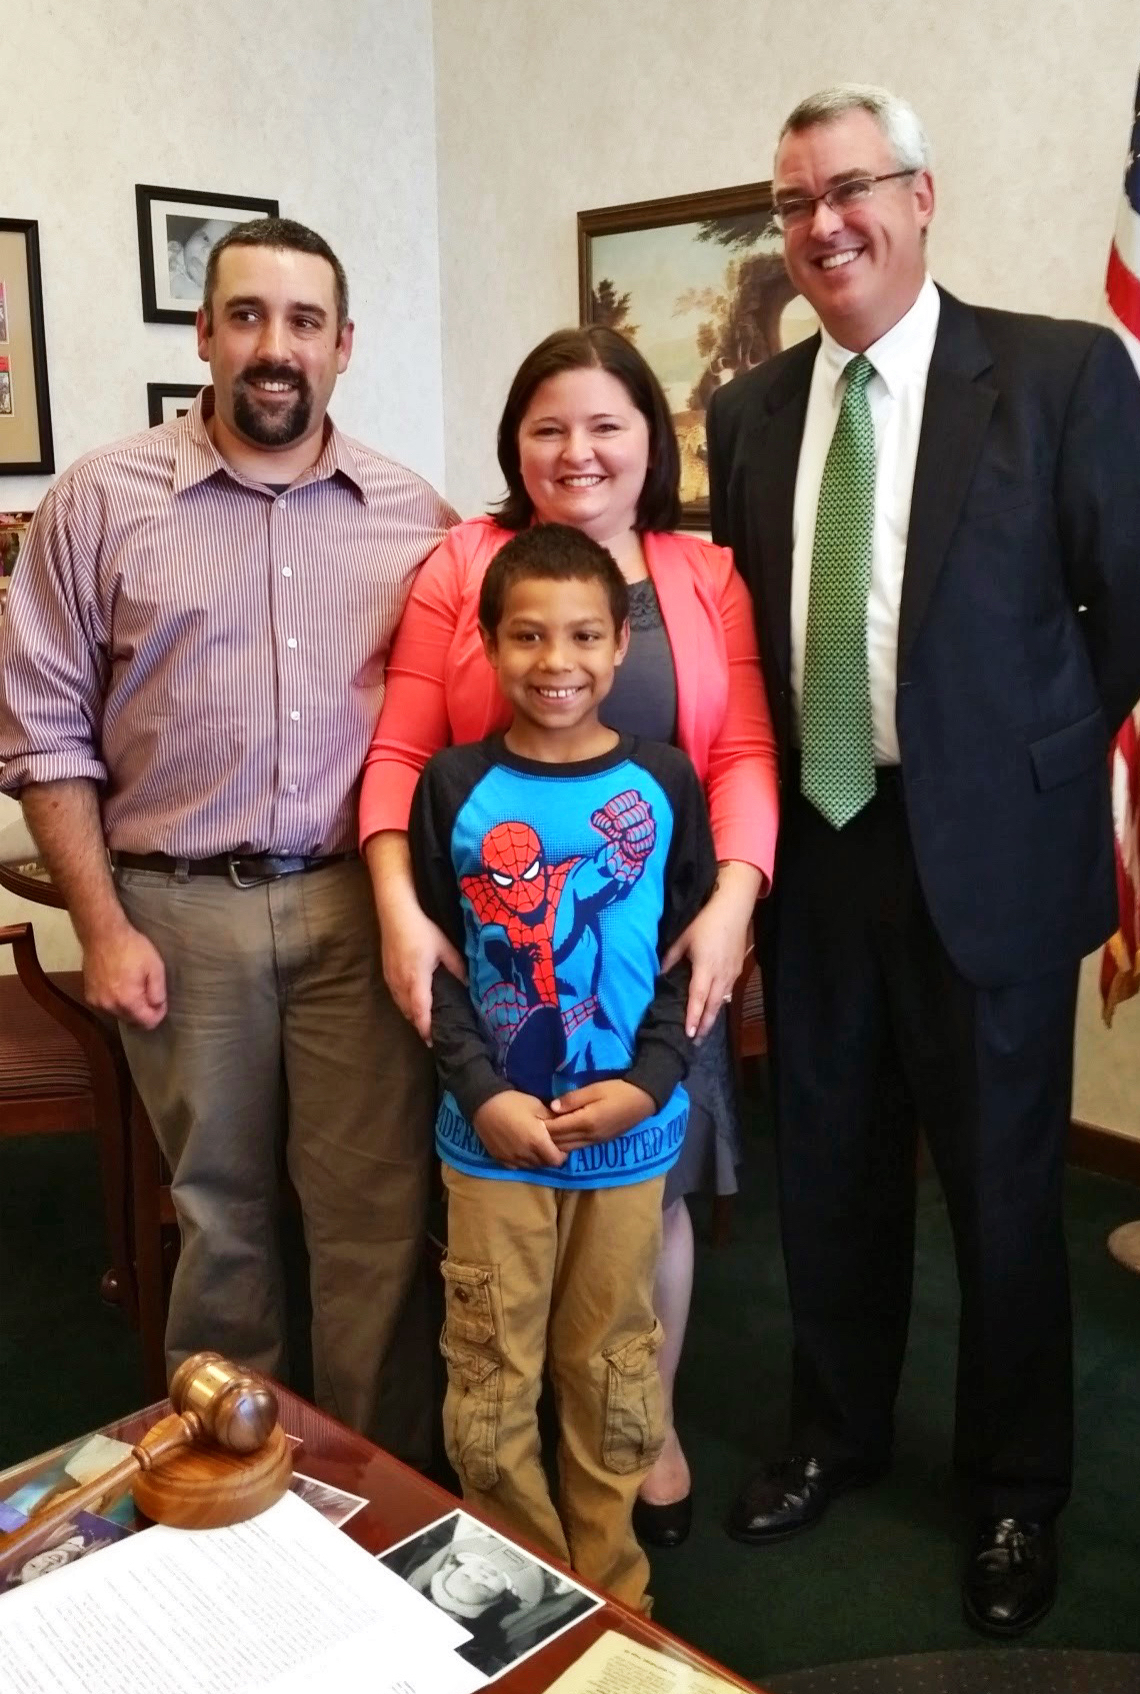 My adoption day, with Honorable John B. Gallagher